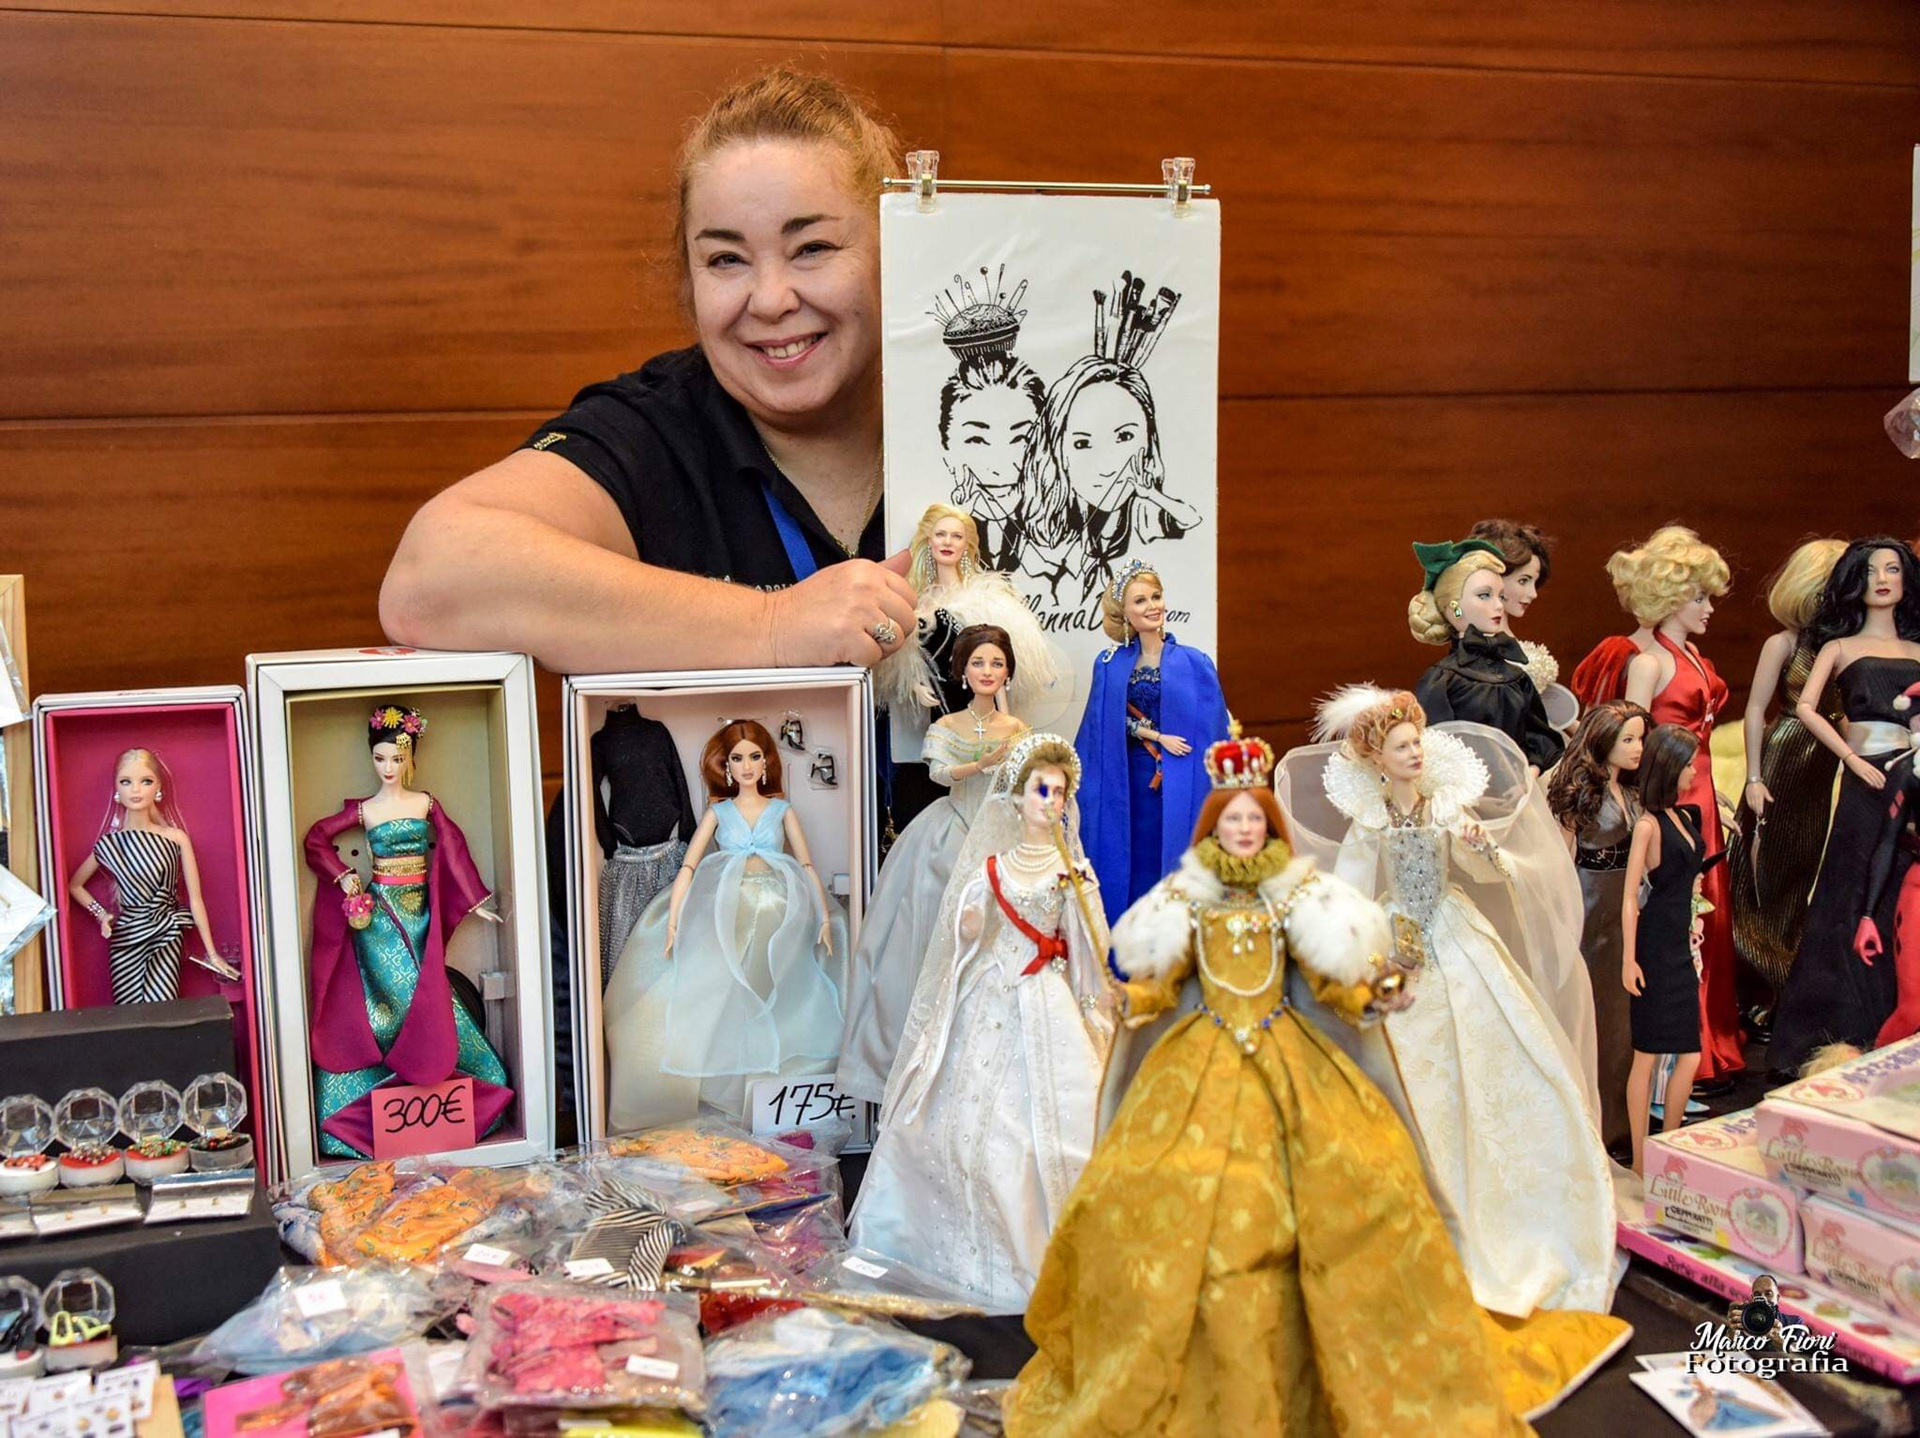 RFDS Roma Fashion Doll Convention 2018, Charity